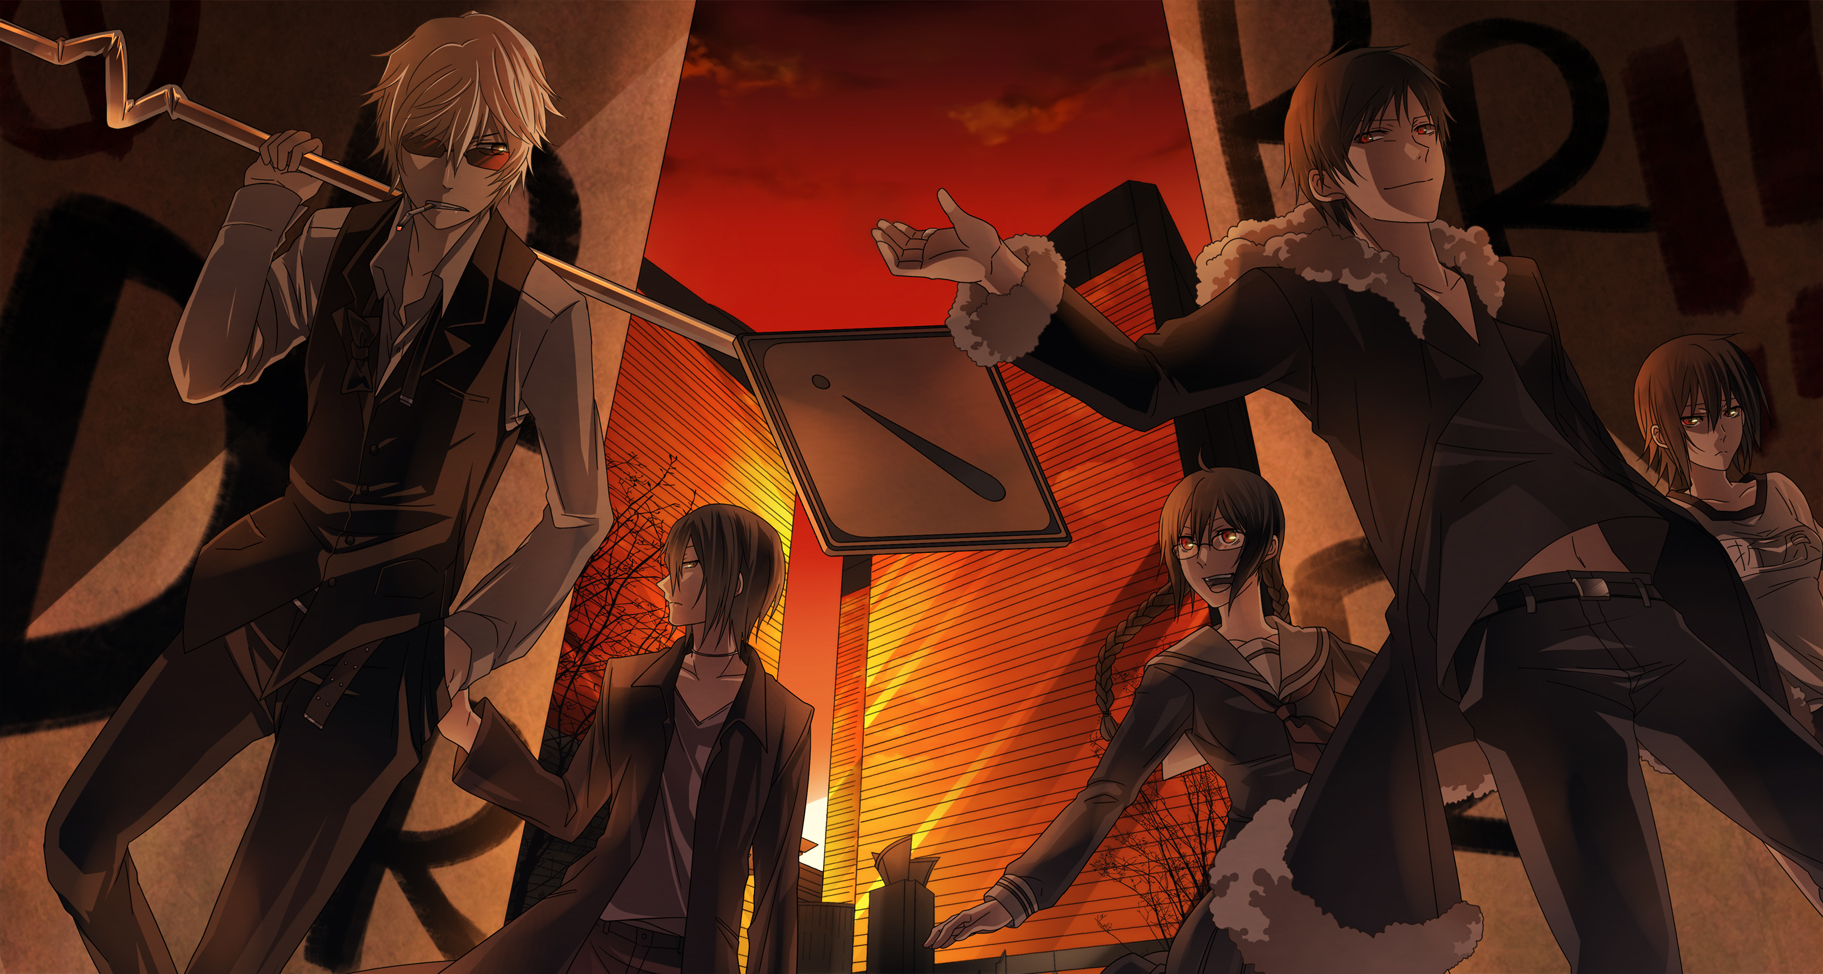 Durarara!! anime desktop wallpaper featuring dynamic characters in vibrant action.